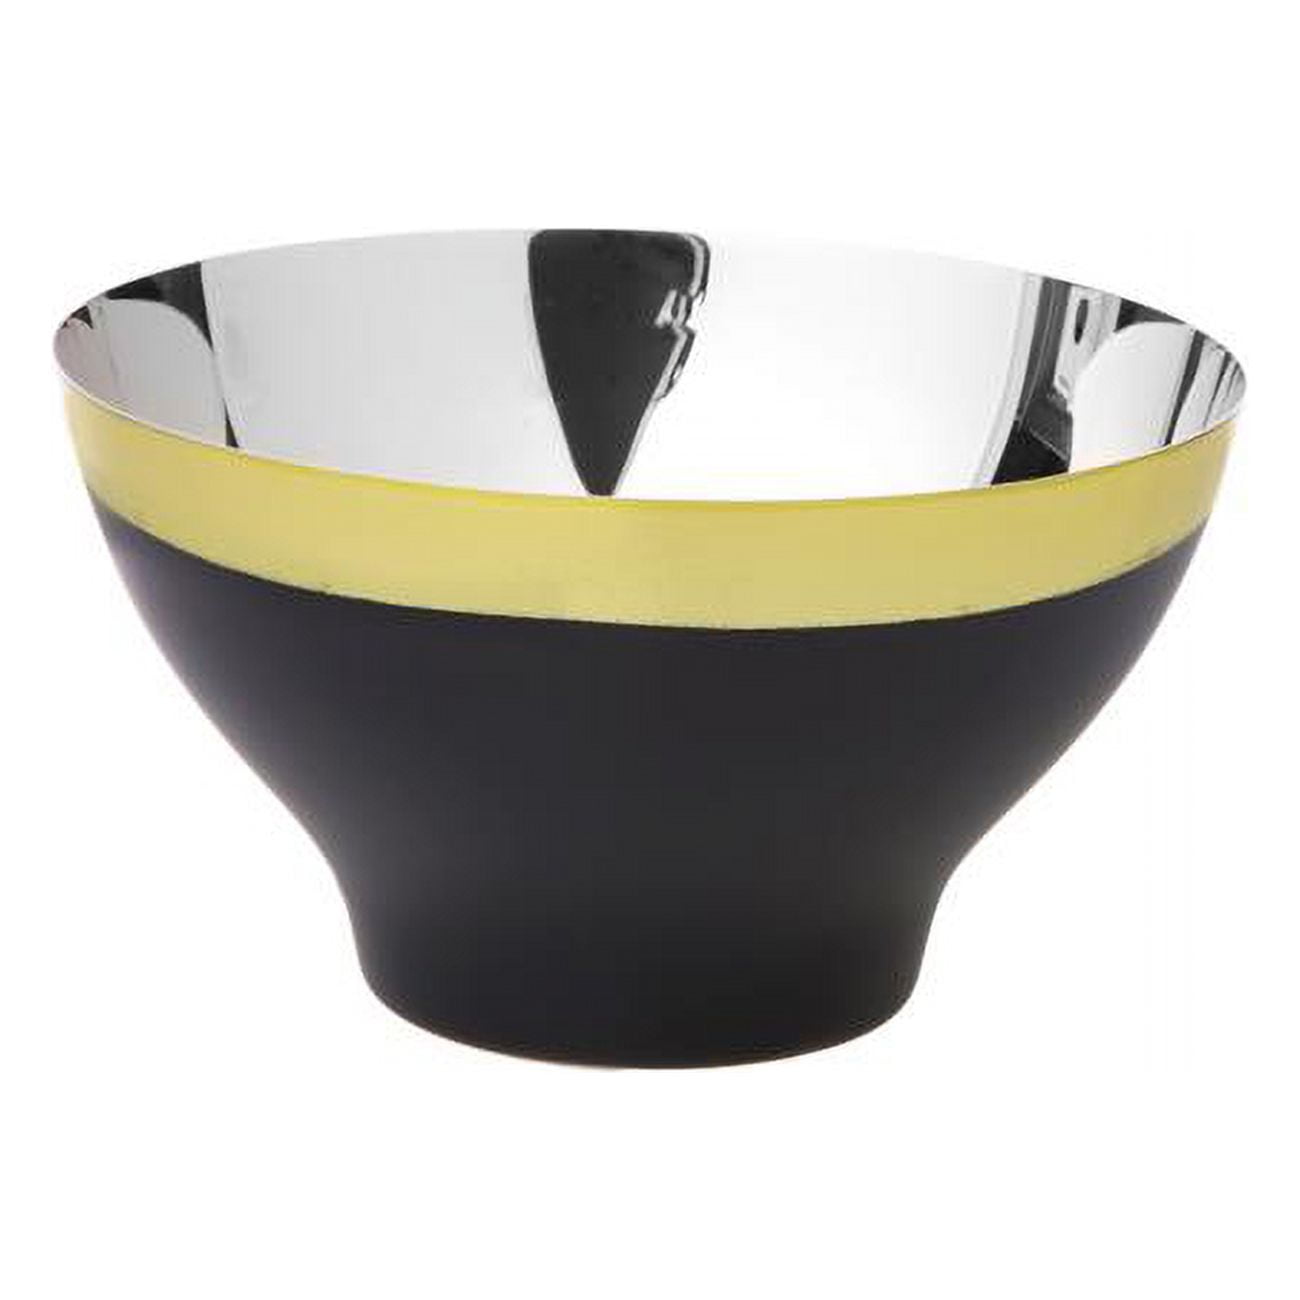 Picture of Classic Touch SBG618 Stainless Steel Round Bowl with Ruffle Design - 11.5 x 4.75 in.